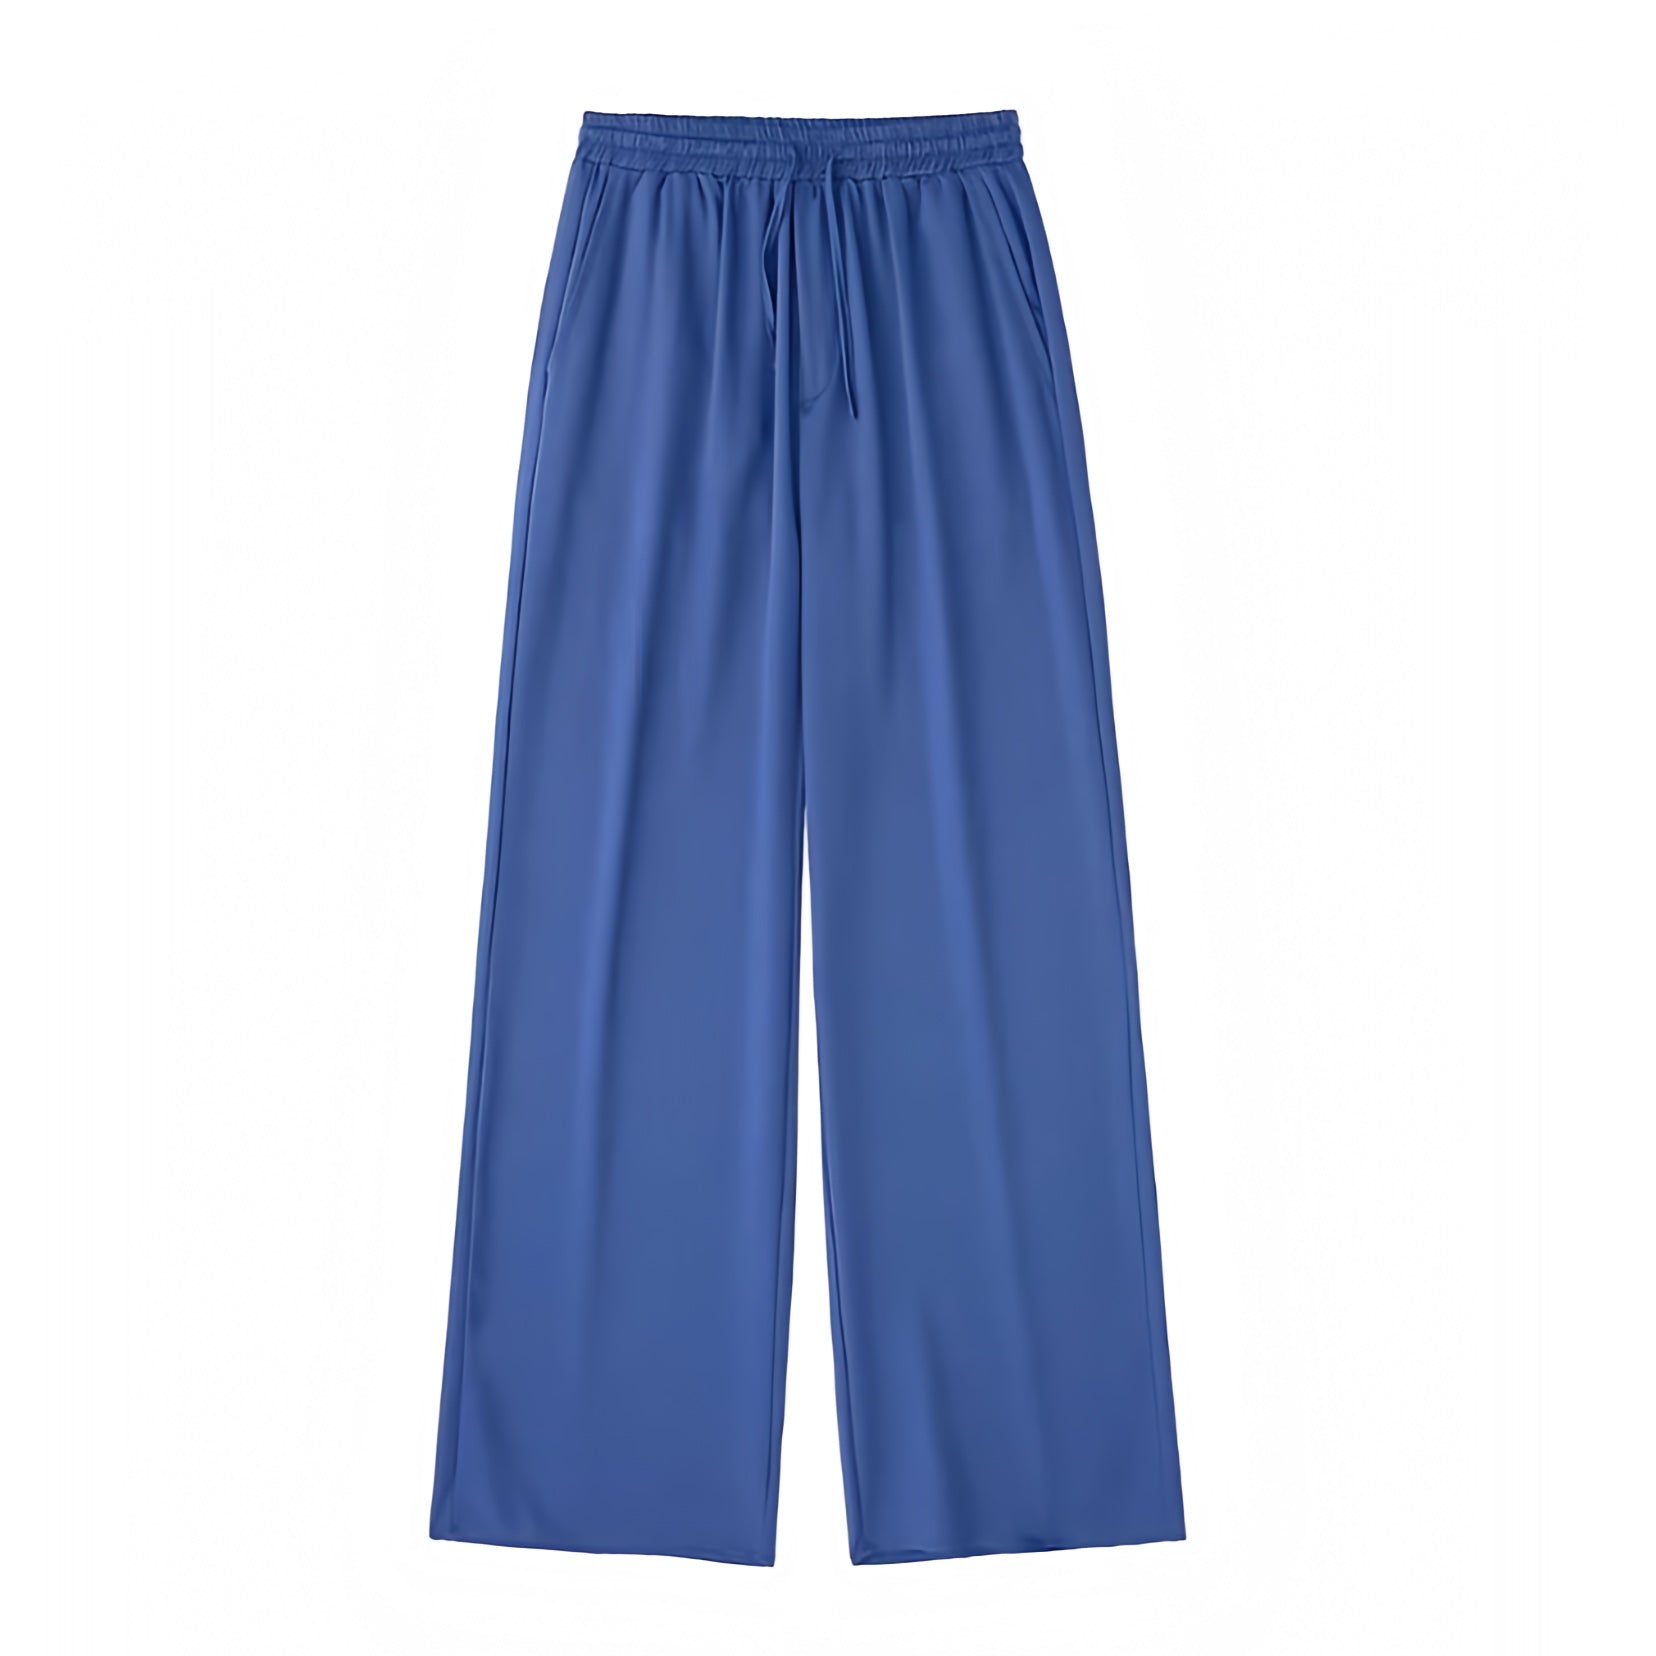 dark-navy-blue-cotton-linen-mid-low-rise-waisted-draw-string-tie-fitted-waist-straight-wide-leg-loose-oversized-trouser-pants-joggers-sweatpants-with-pockets-comfortable-cozy-women-ladies-chic-trendy-spring-2024-summer-elegant-casual-feminine-lounge-european-vacation-beach-wear-coastal-granddaughter-zara-revolve-aritzia-brandy-melville-pacsun